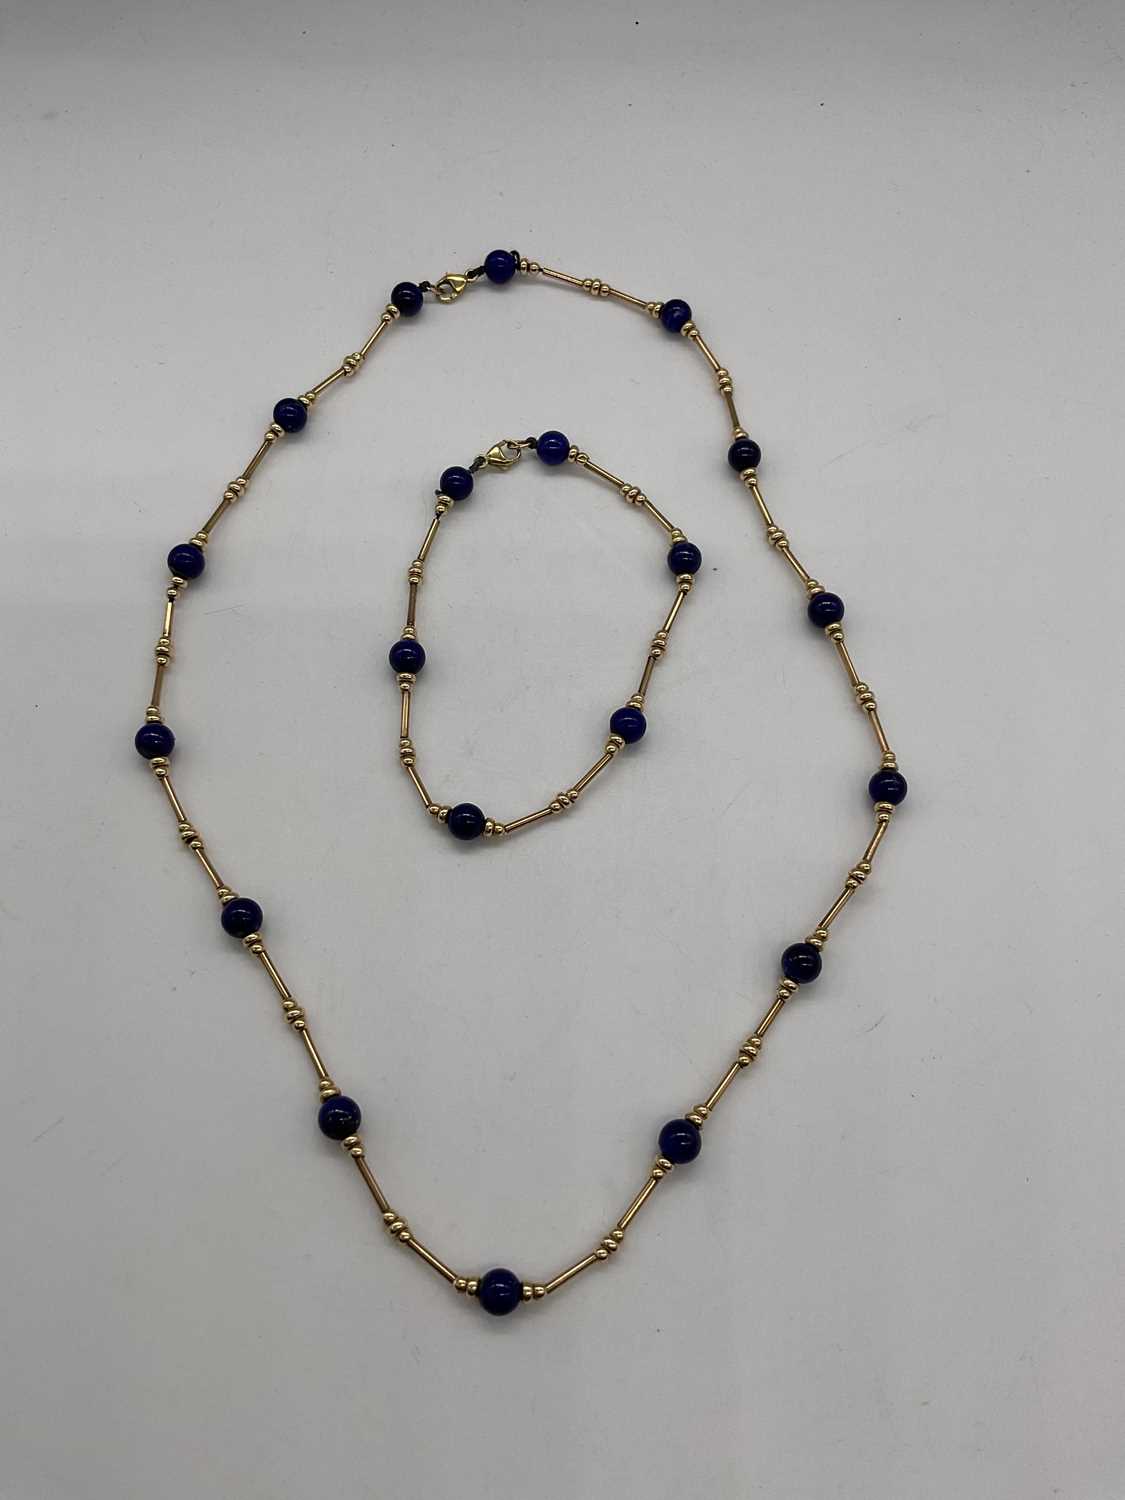 A 9ct yellow gold chain and bracelet set with bead spacers and blue roundels, necklace length